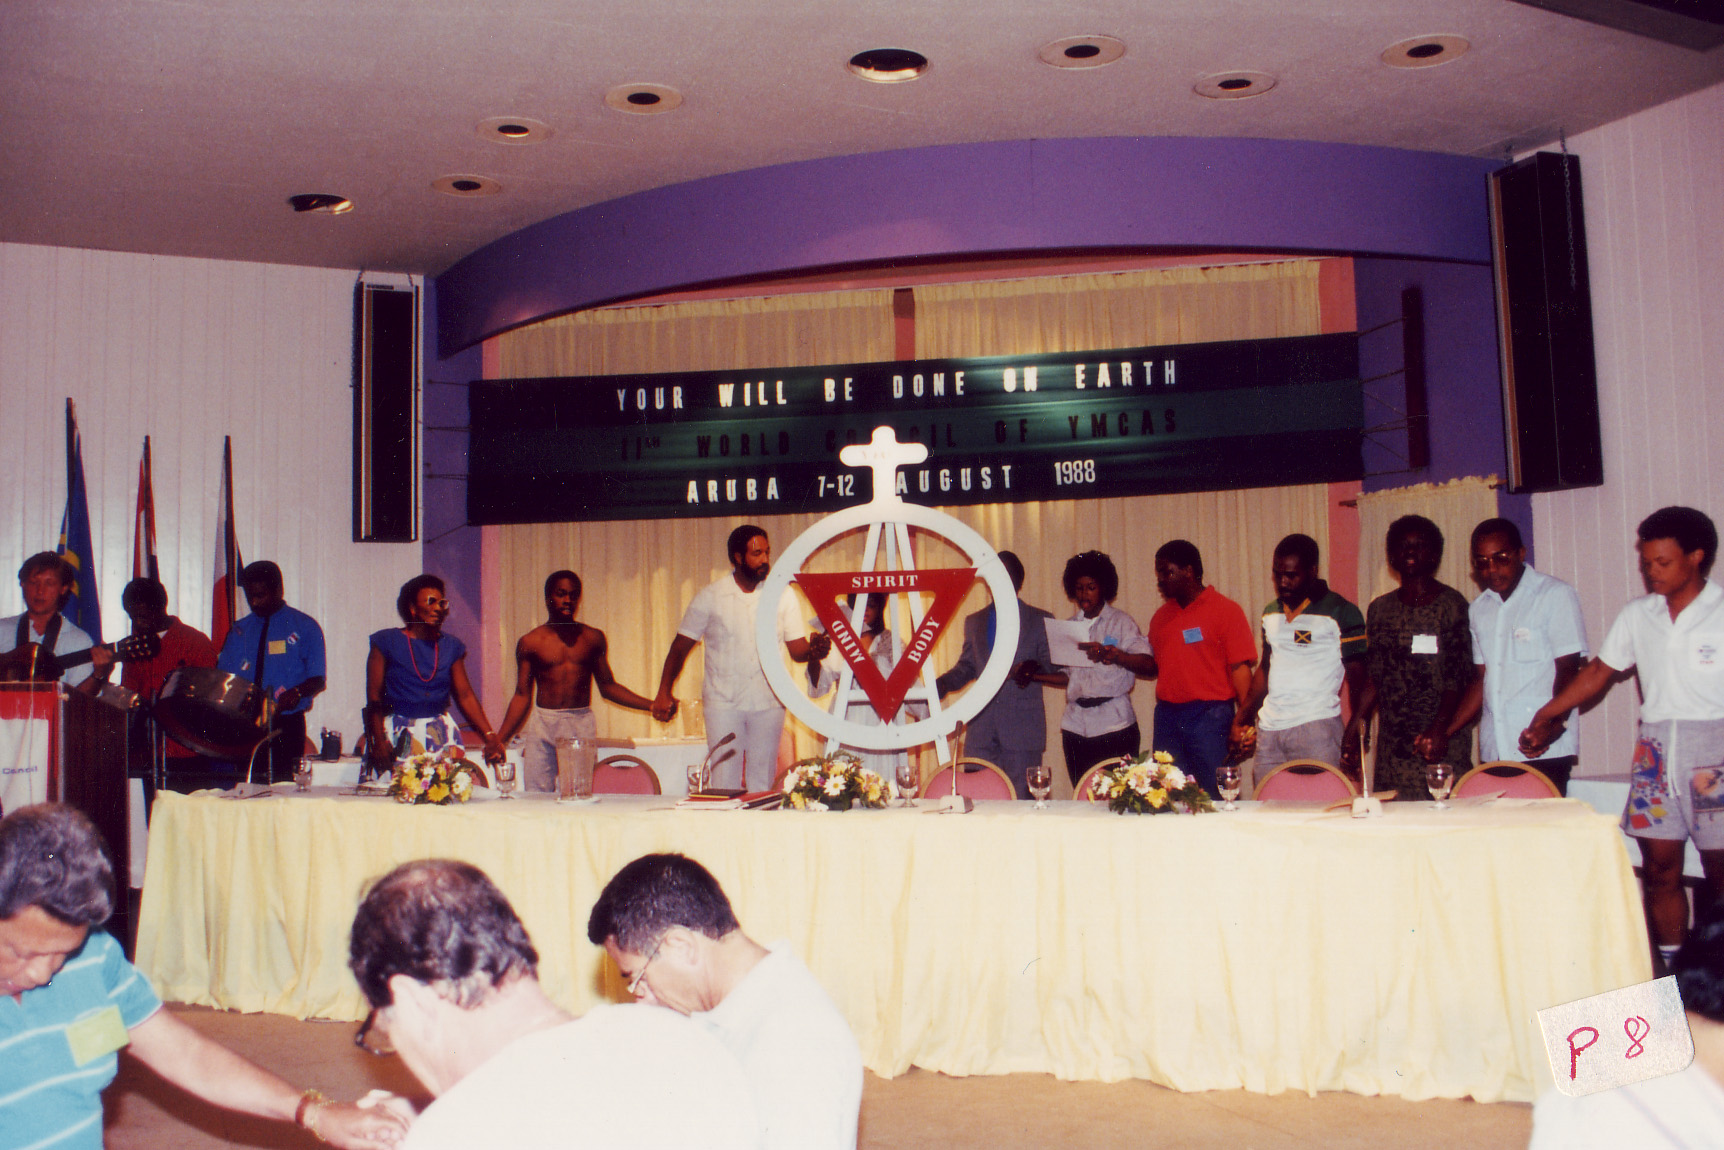 1988 The 10th YMCA World Council, Aruba - a Women_s conference is included